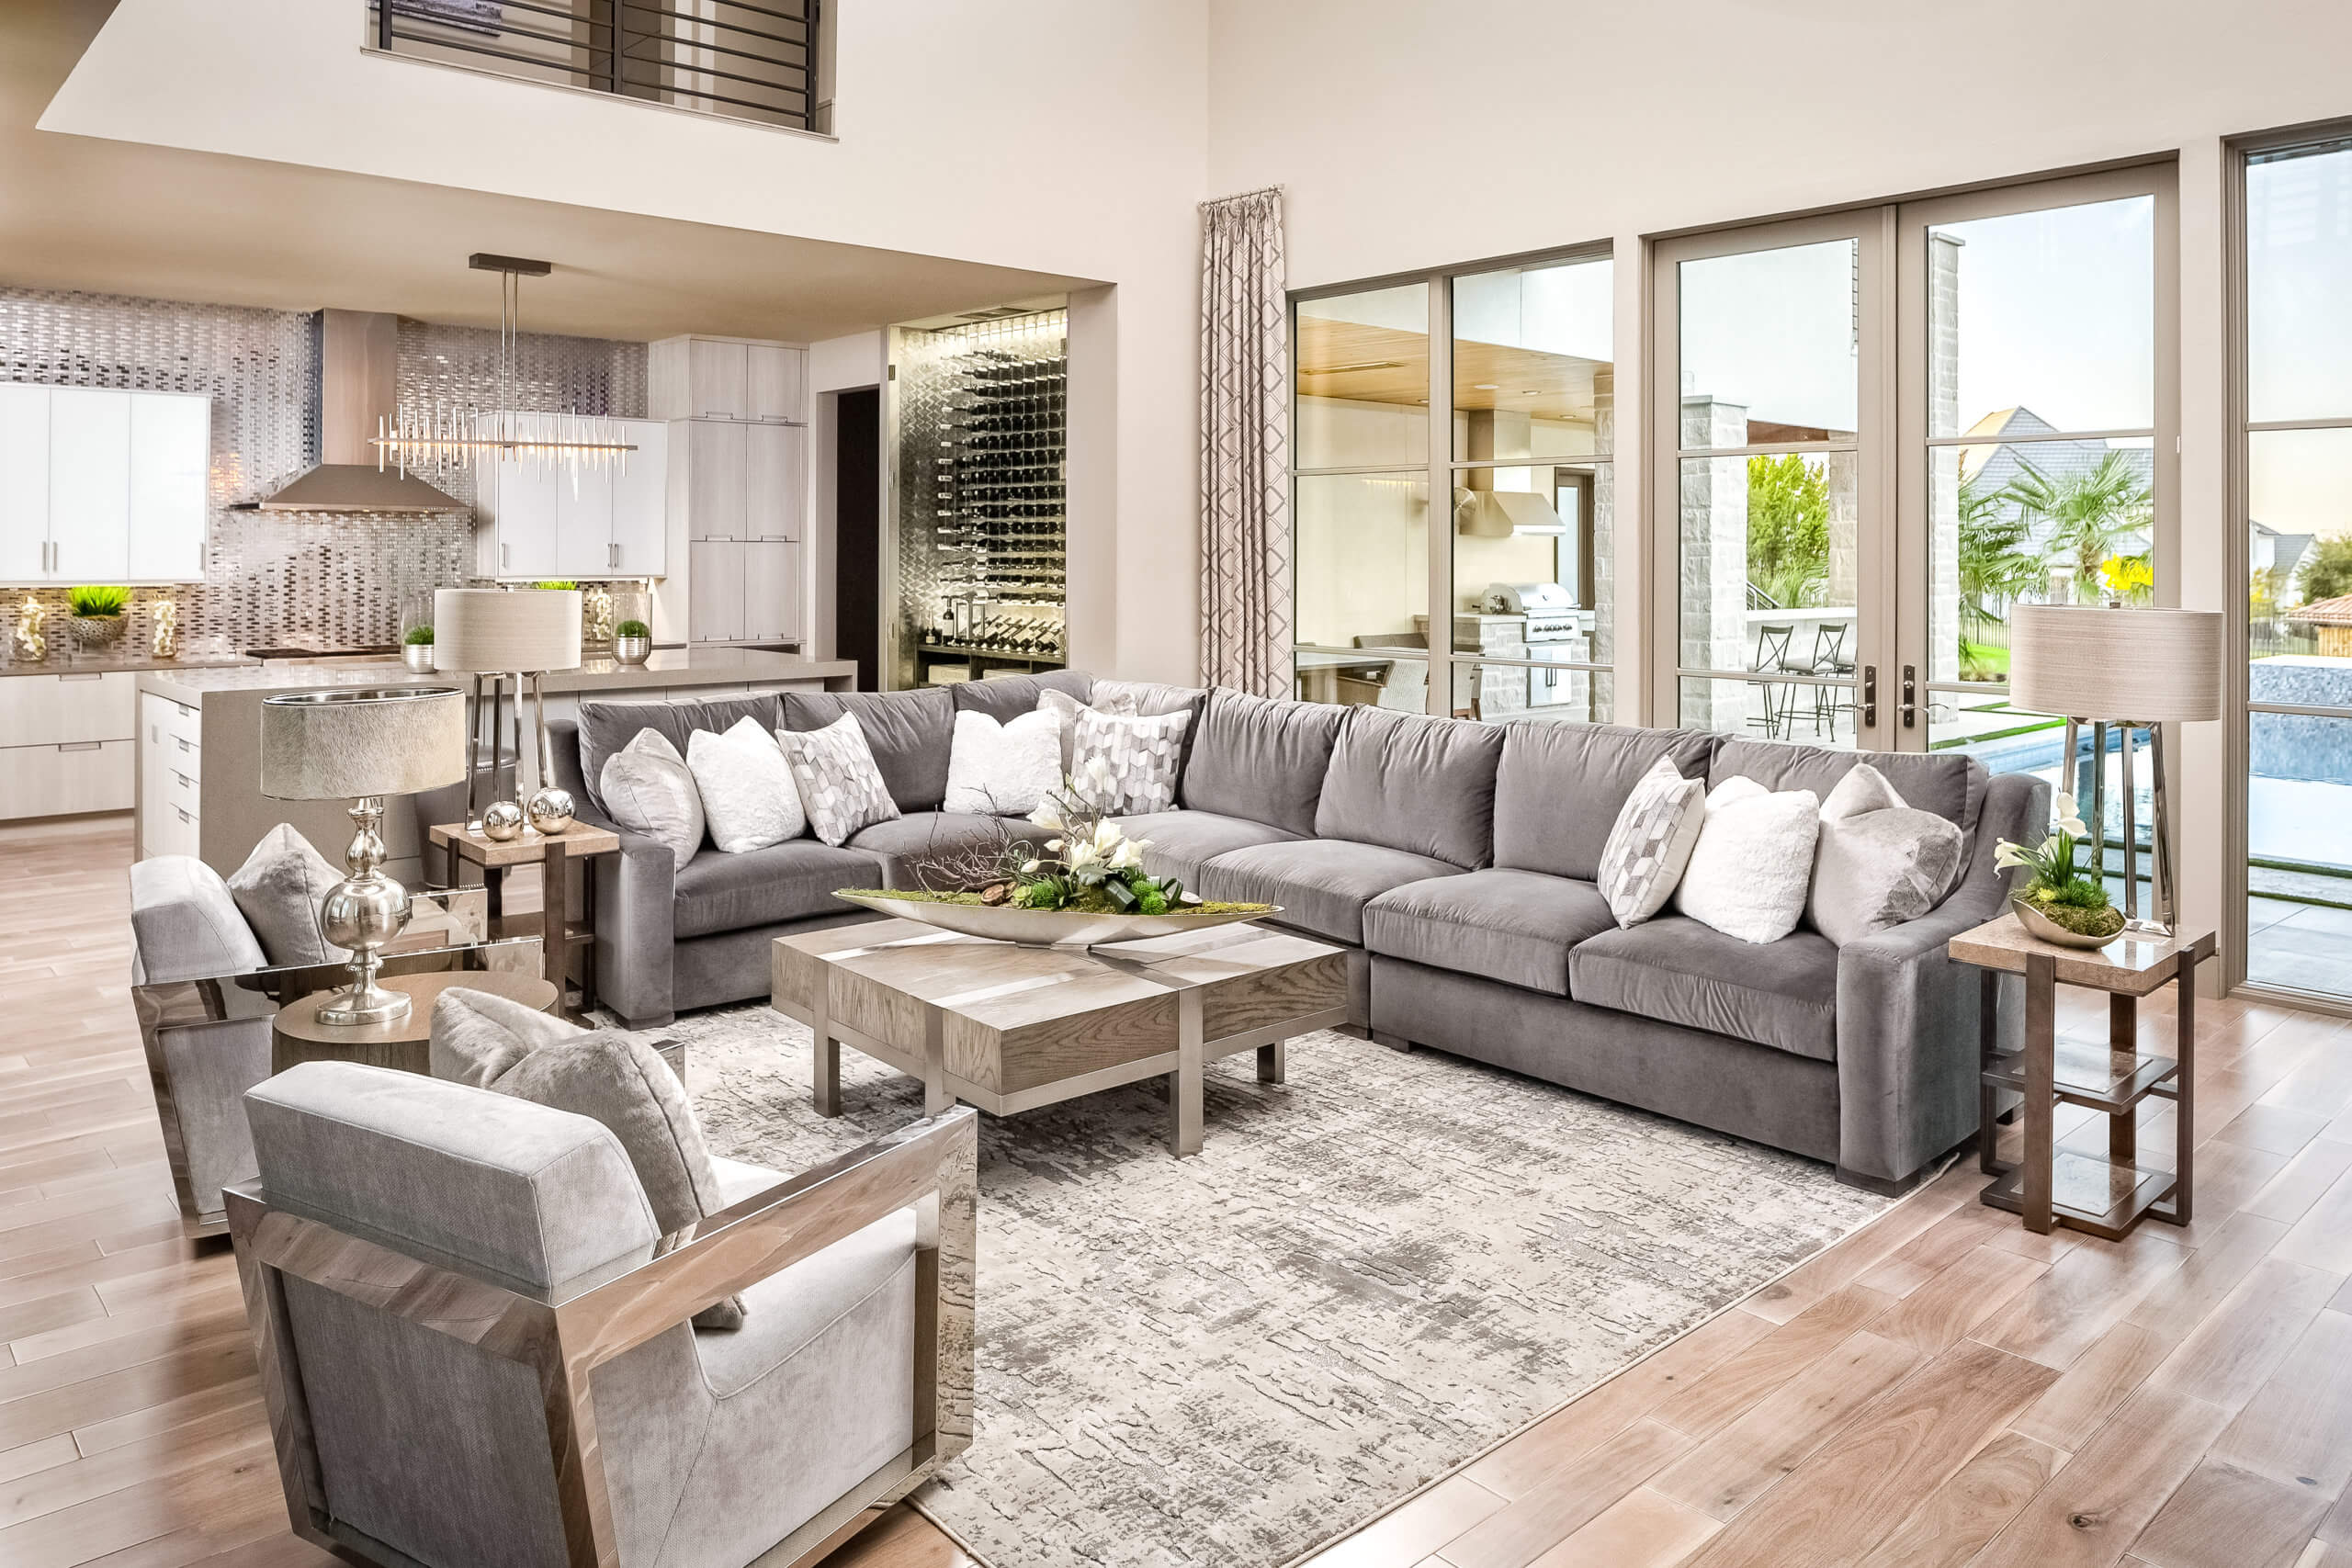 10 Best Interior Designers Based in Fort Worth Texas